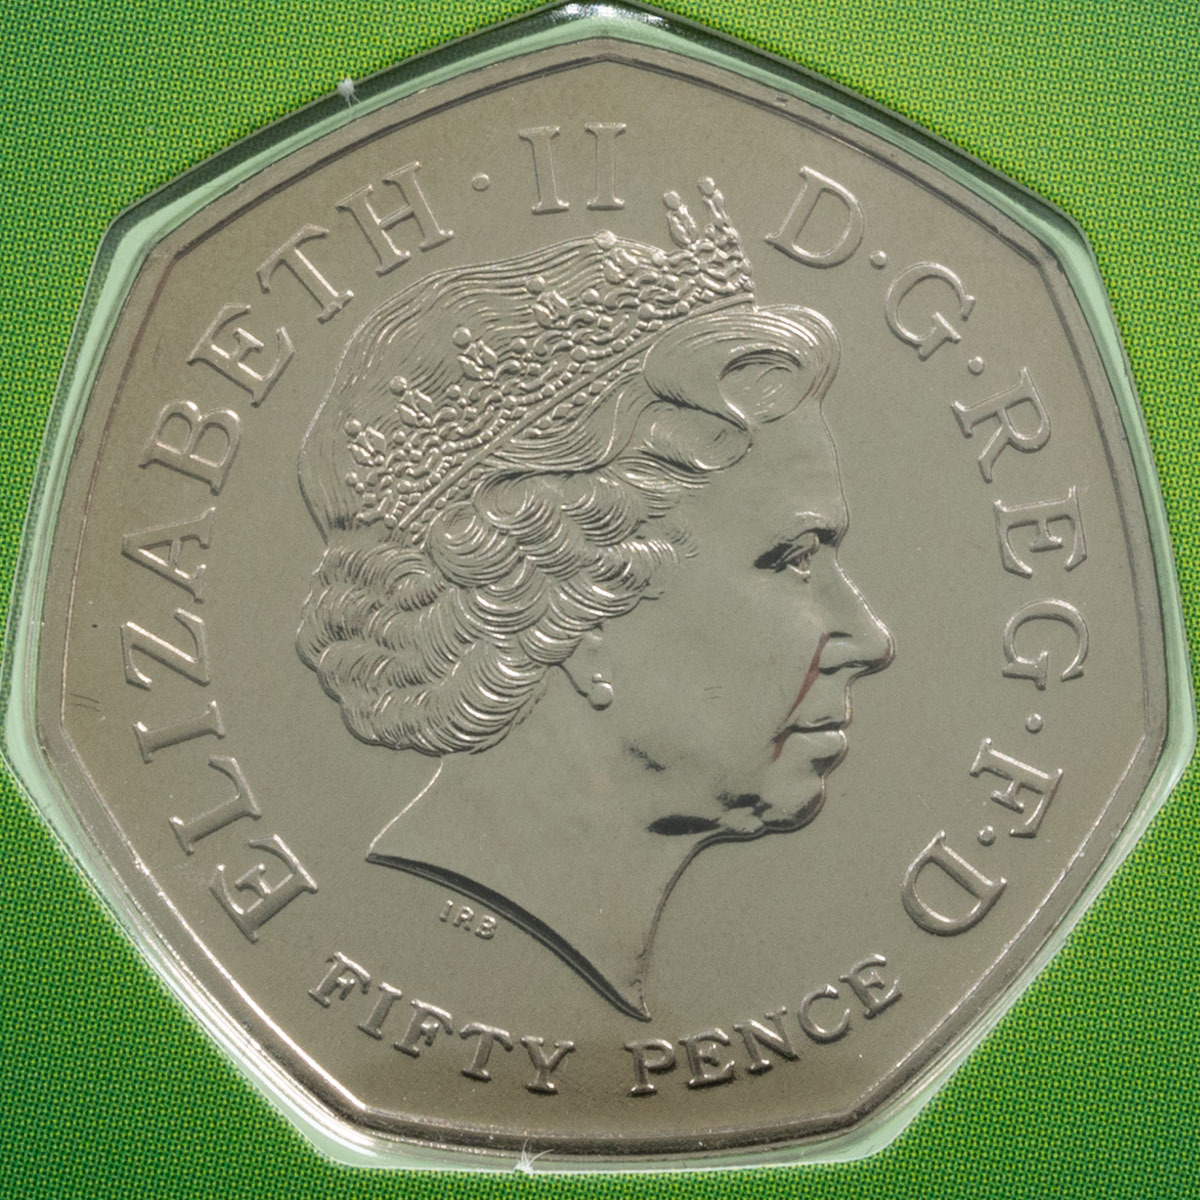 UKWWFBU 2011 World Wildlife Fund Fifty Pence Brilliant Uncirculated Coin In Folder Obverse